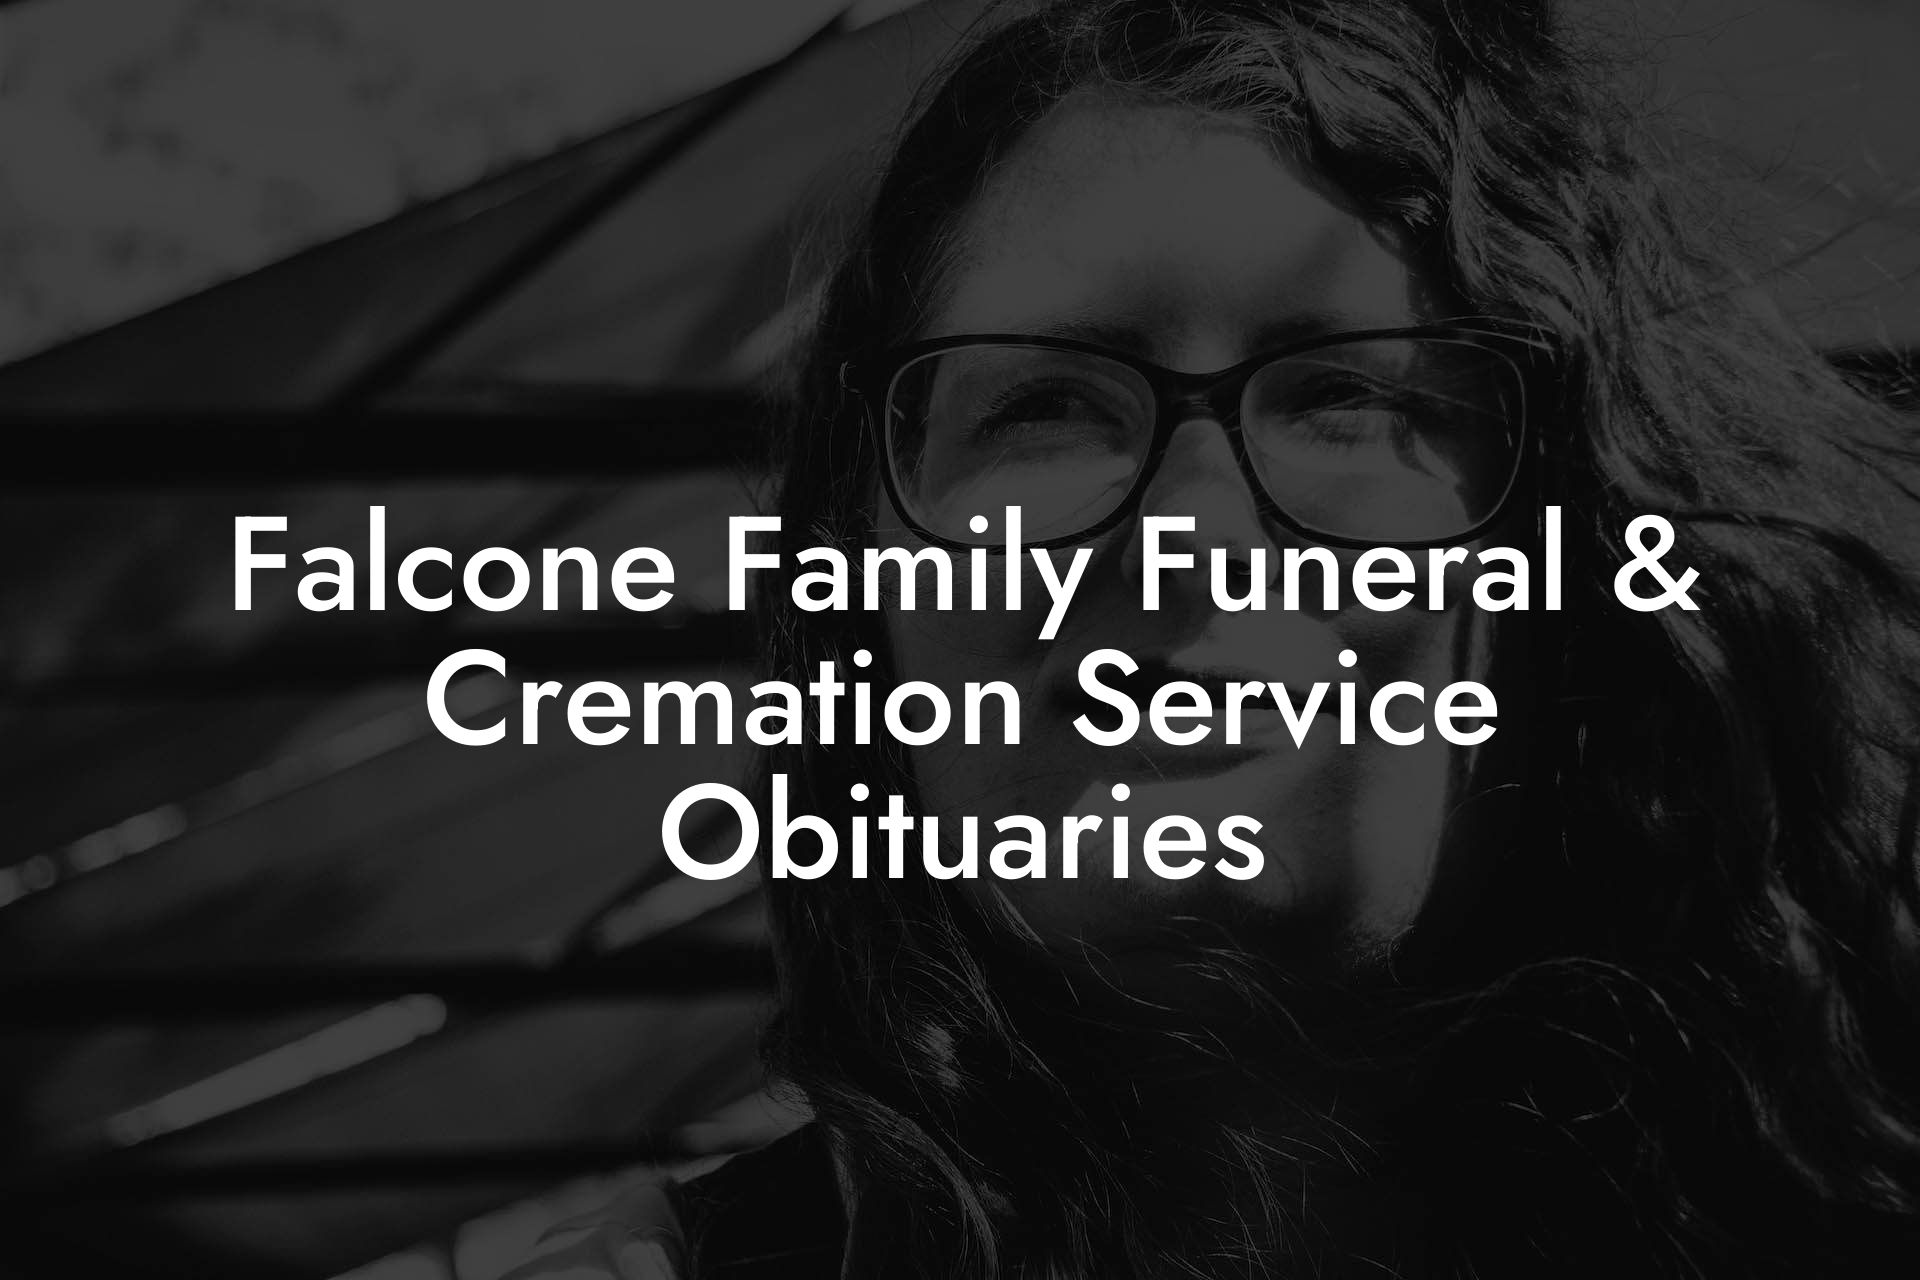 Falcone Family Funeral & Cremation Service Obituaries